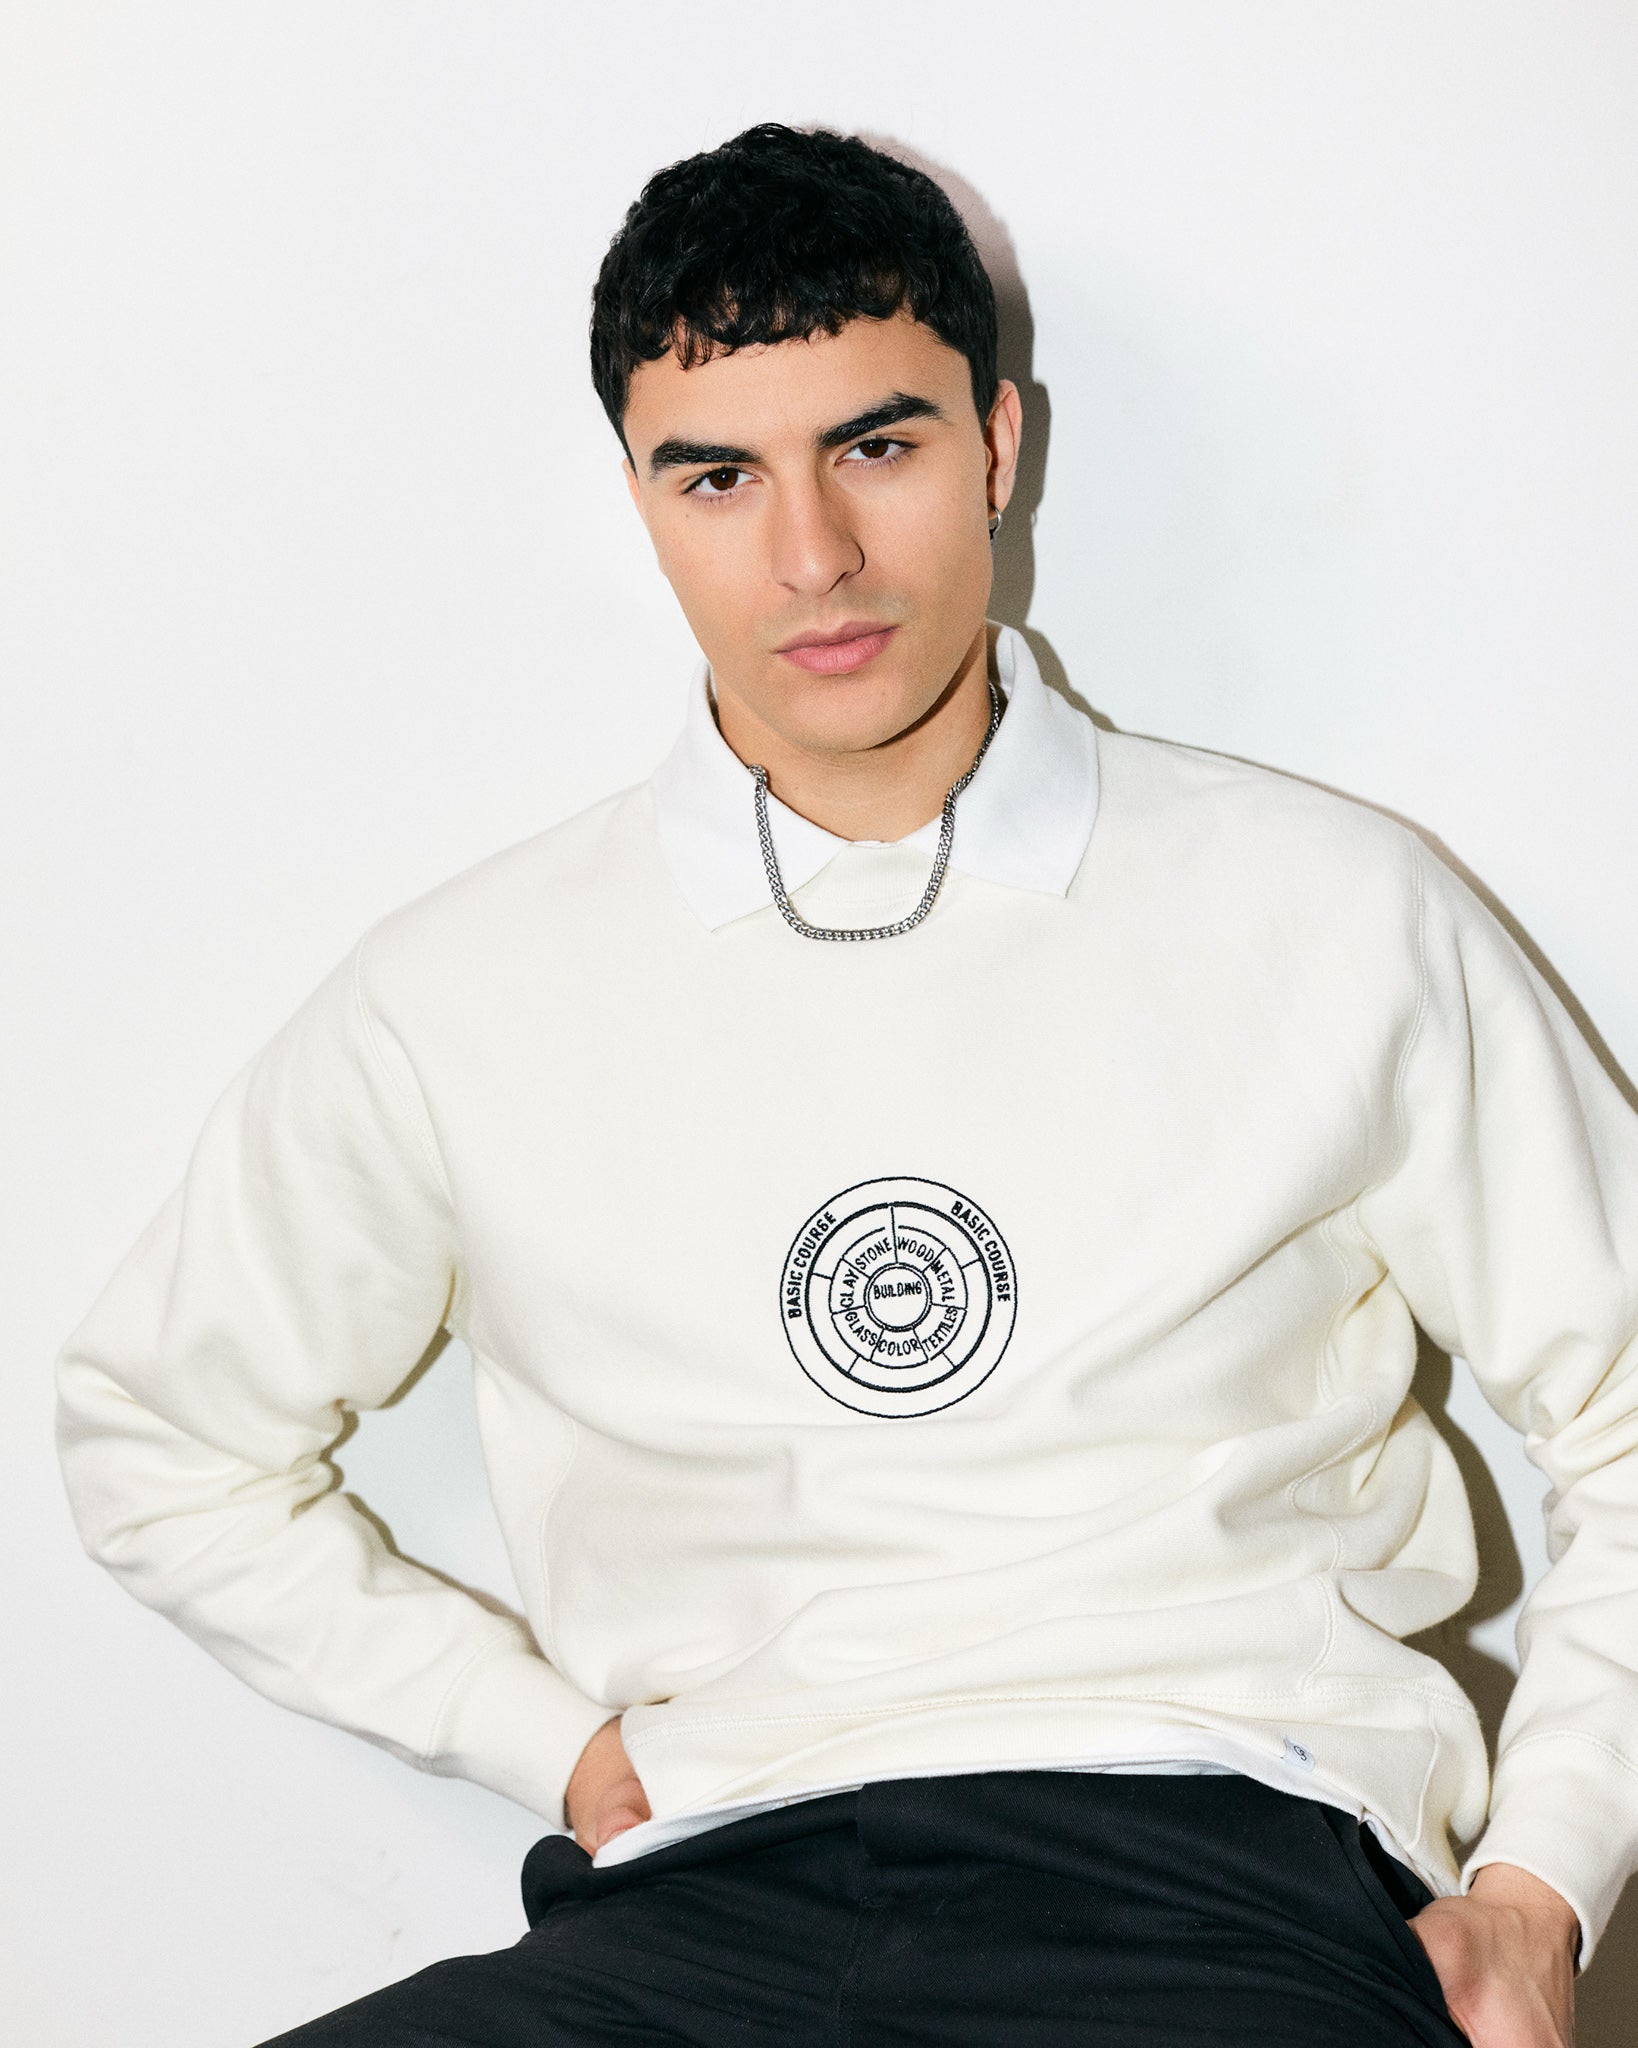 Arjang Mahdavi wears Cream / Off White / Ceramic Heavyweight Sweatshirt / Crewneck with embroidered print of the Bauhaus School Conceptual Curriculum Diagram and the Official Bauhaus seal on the back. 